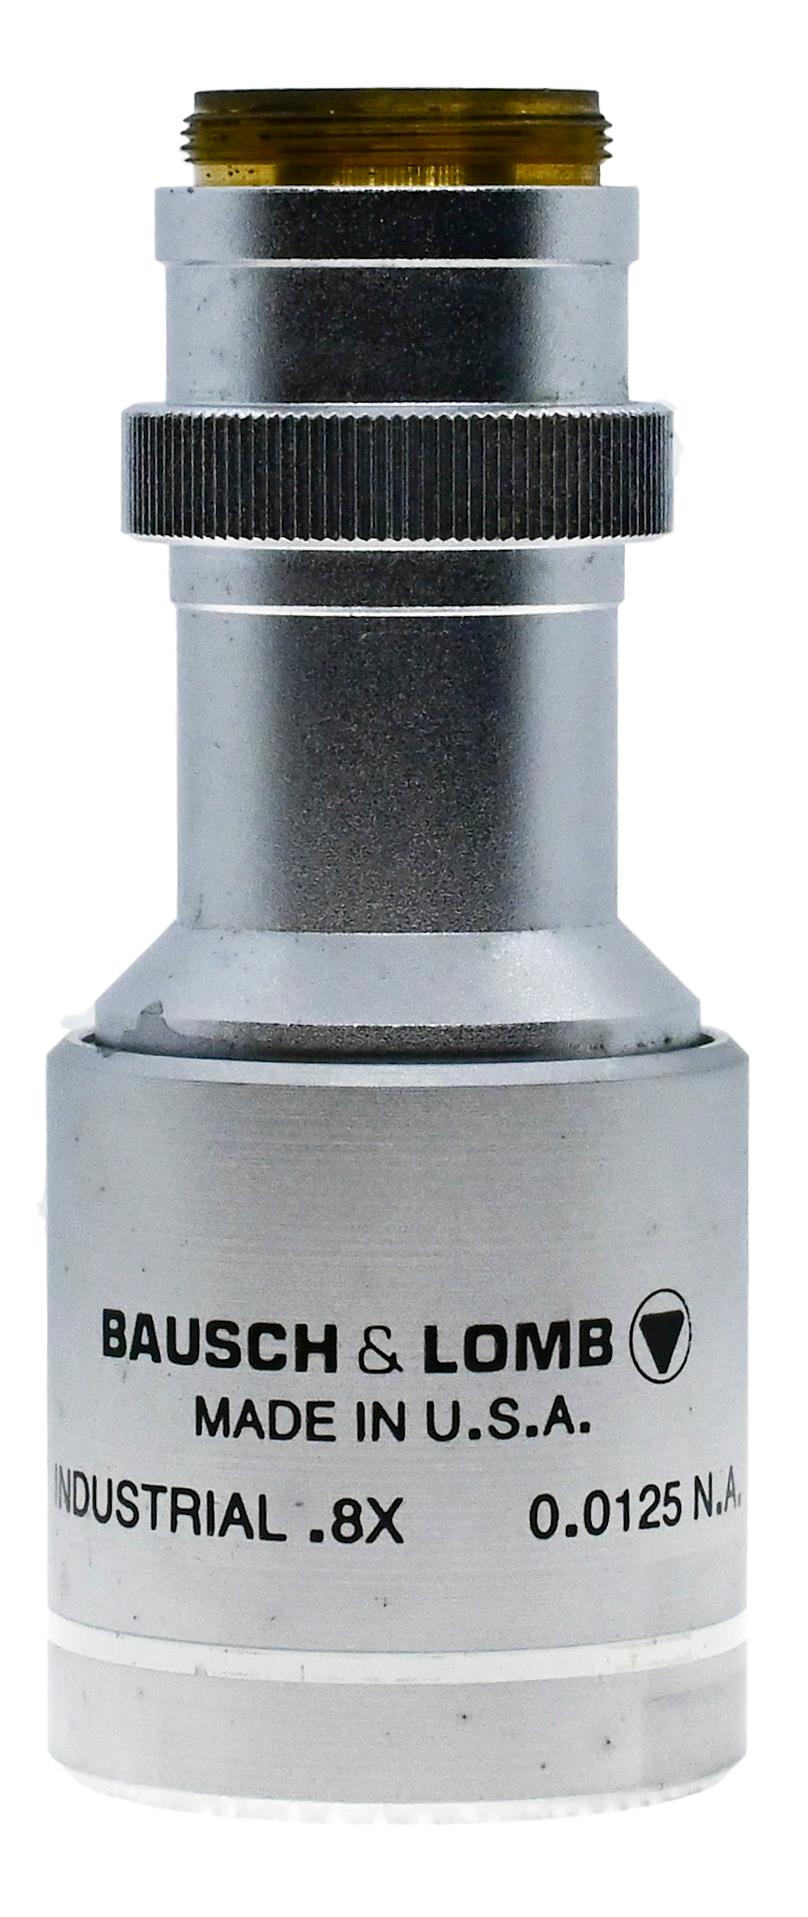 Bausch & Lomb Industrial 0.8x Objective